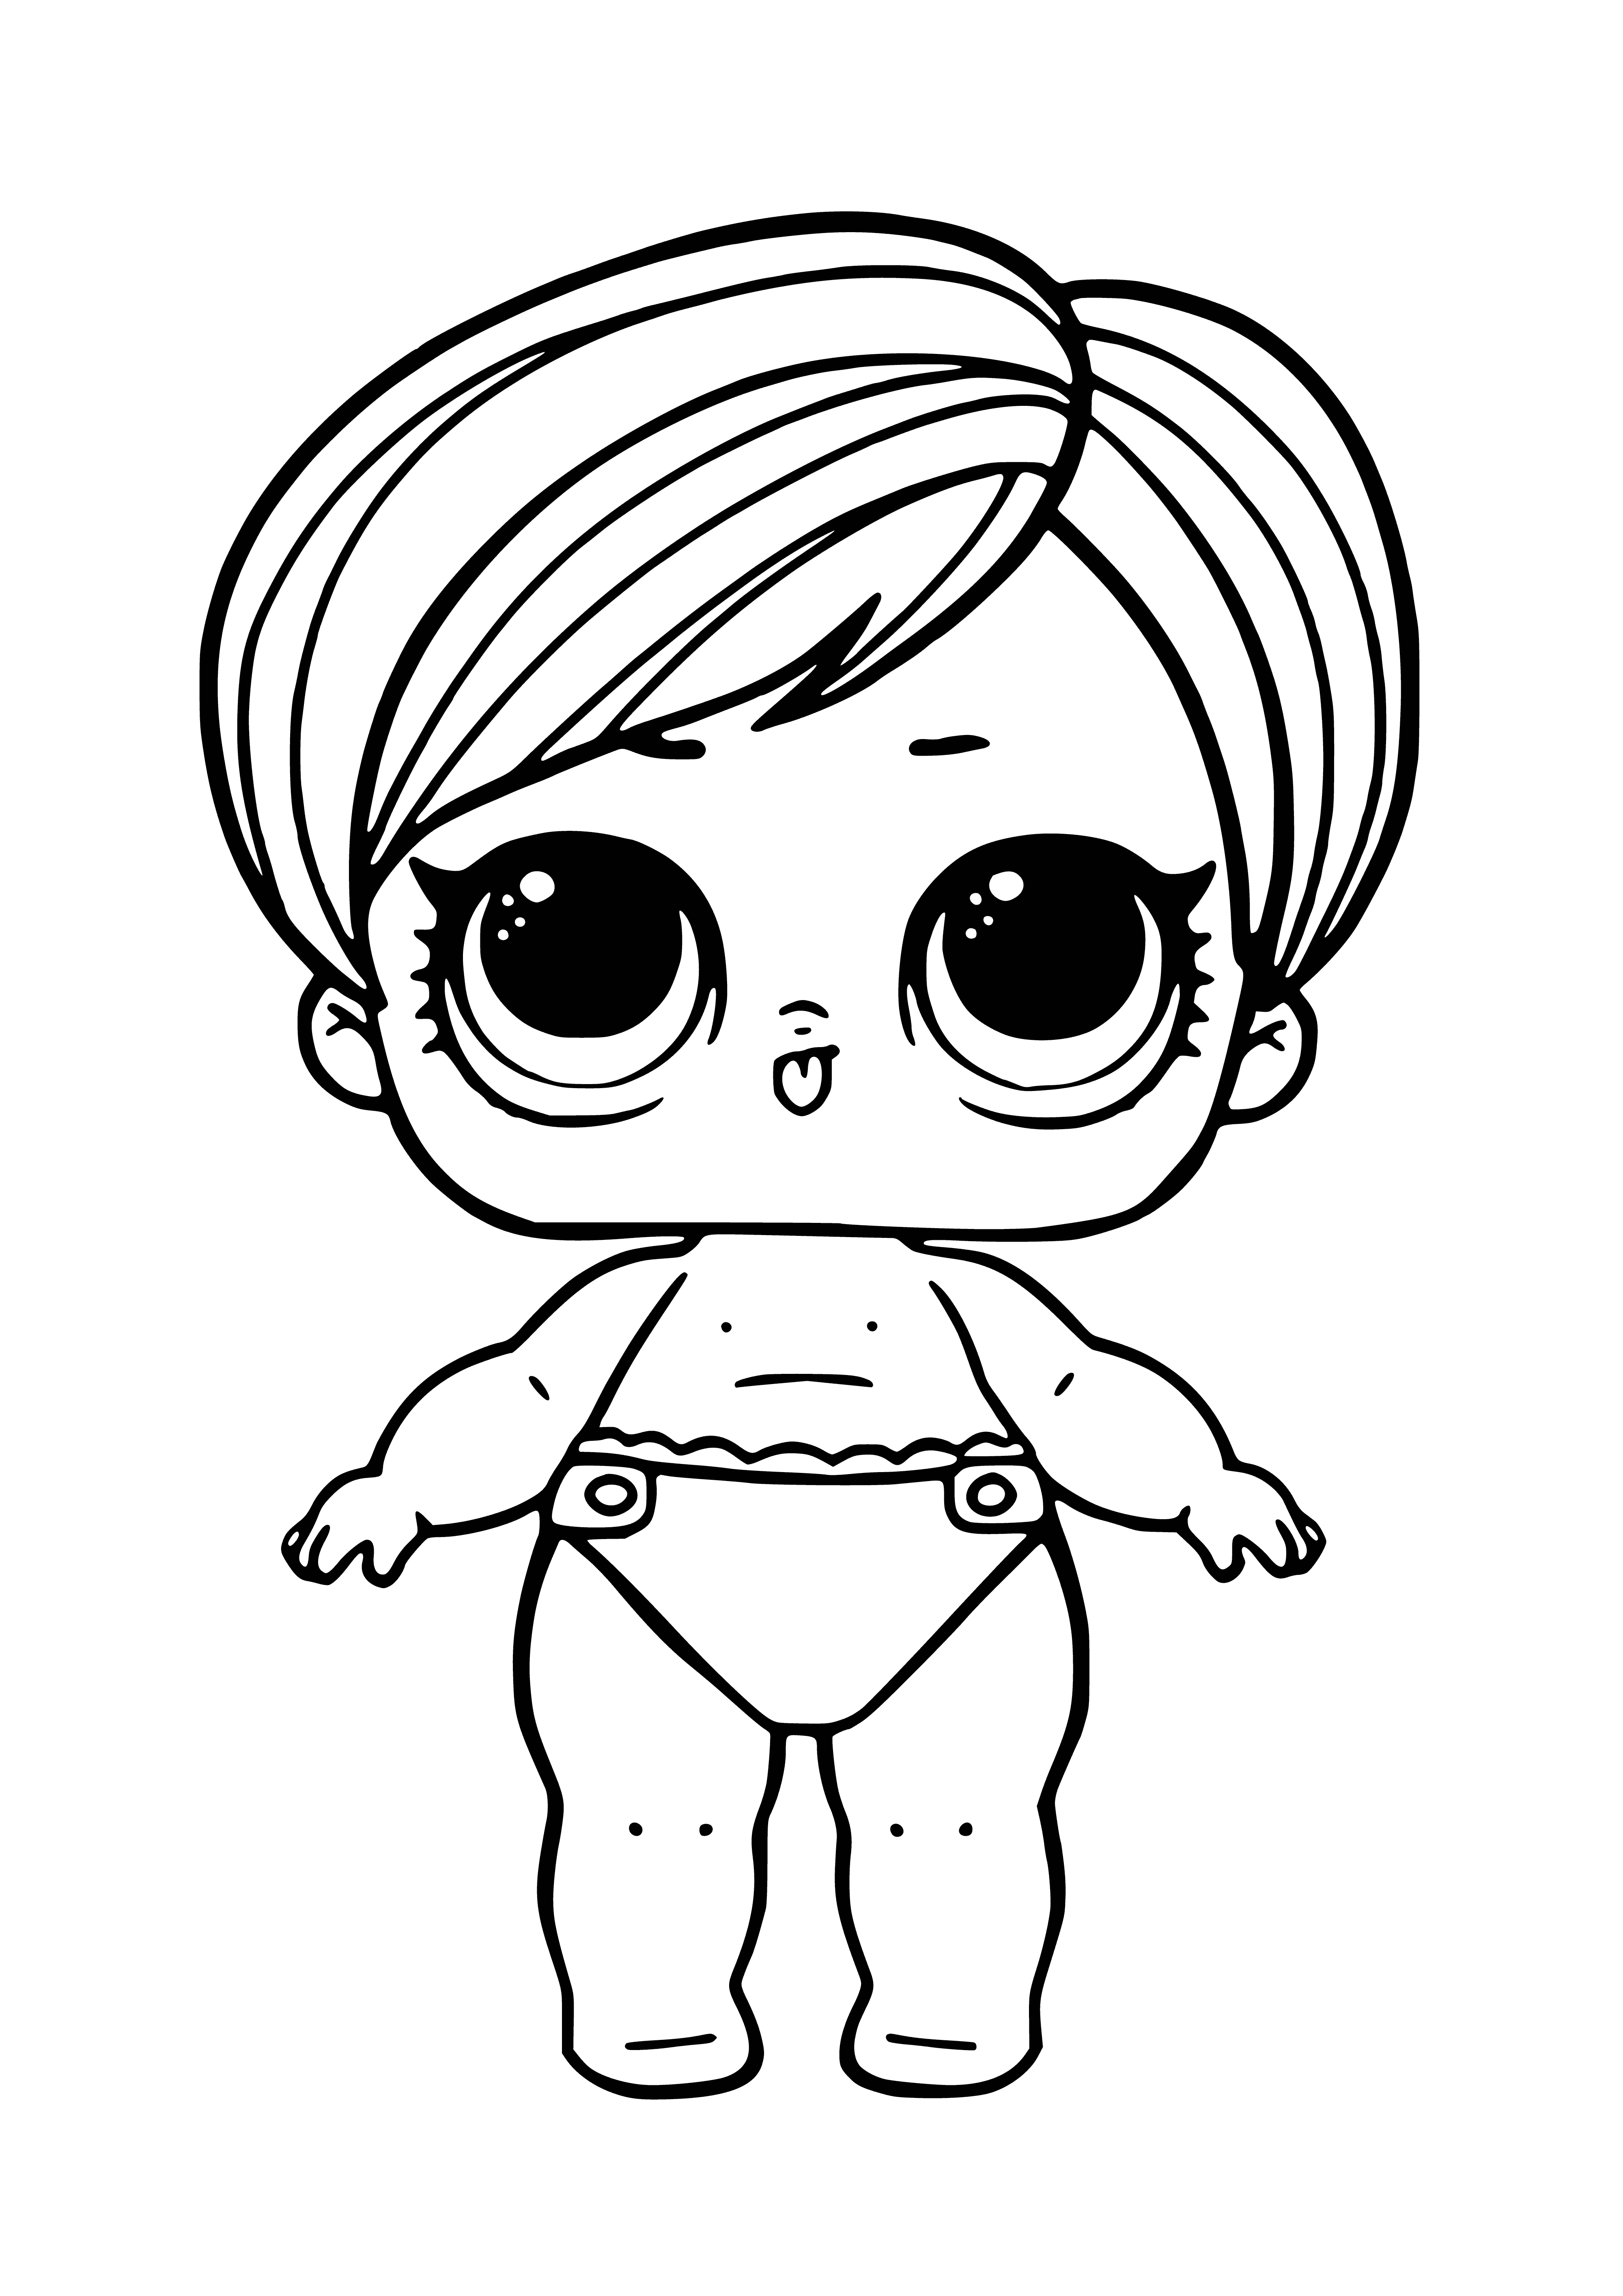 Lol little hipster doll coloring page